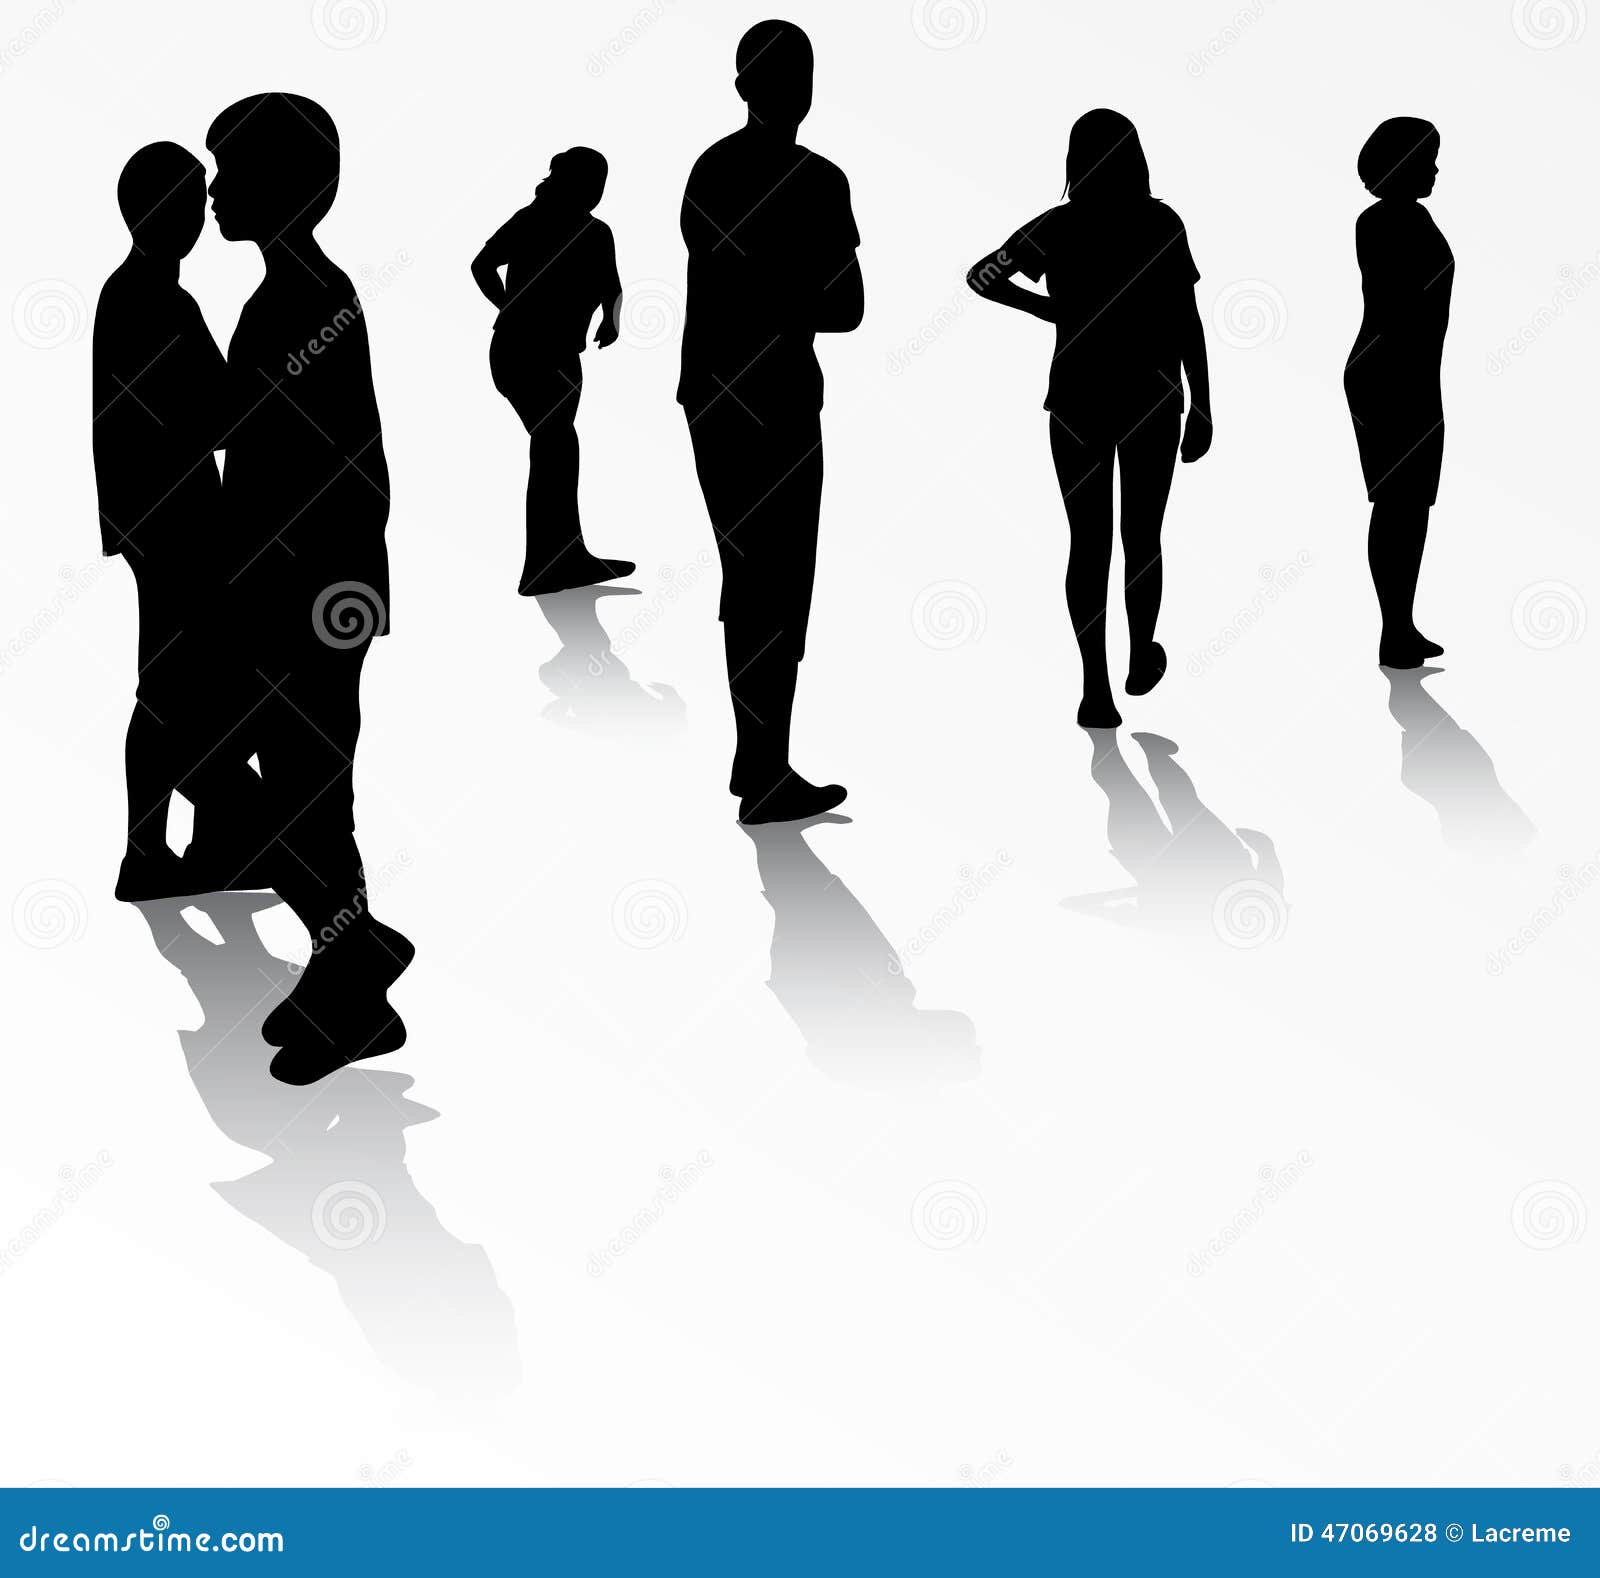 Group of people stock vector. Illustration of people - 47069628